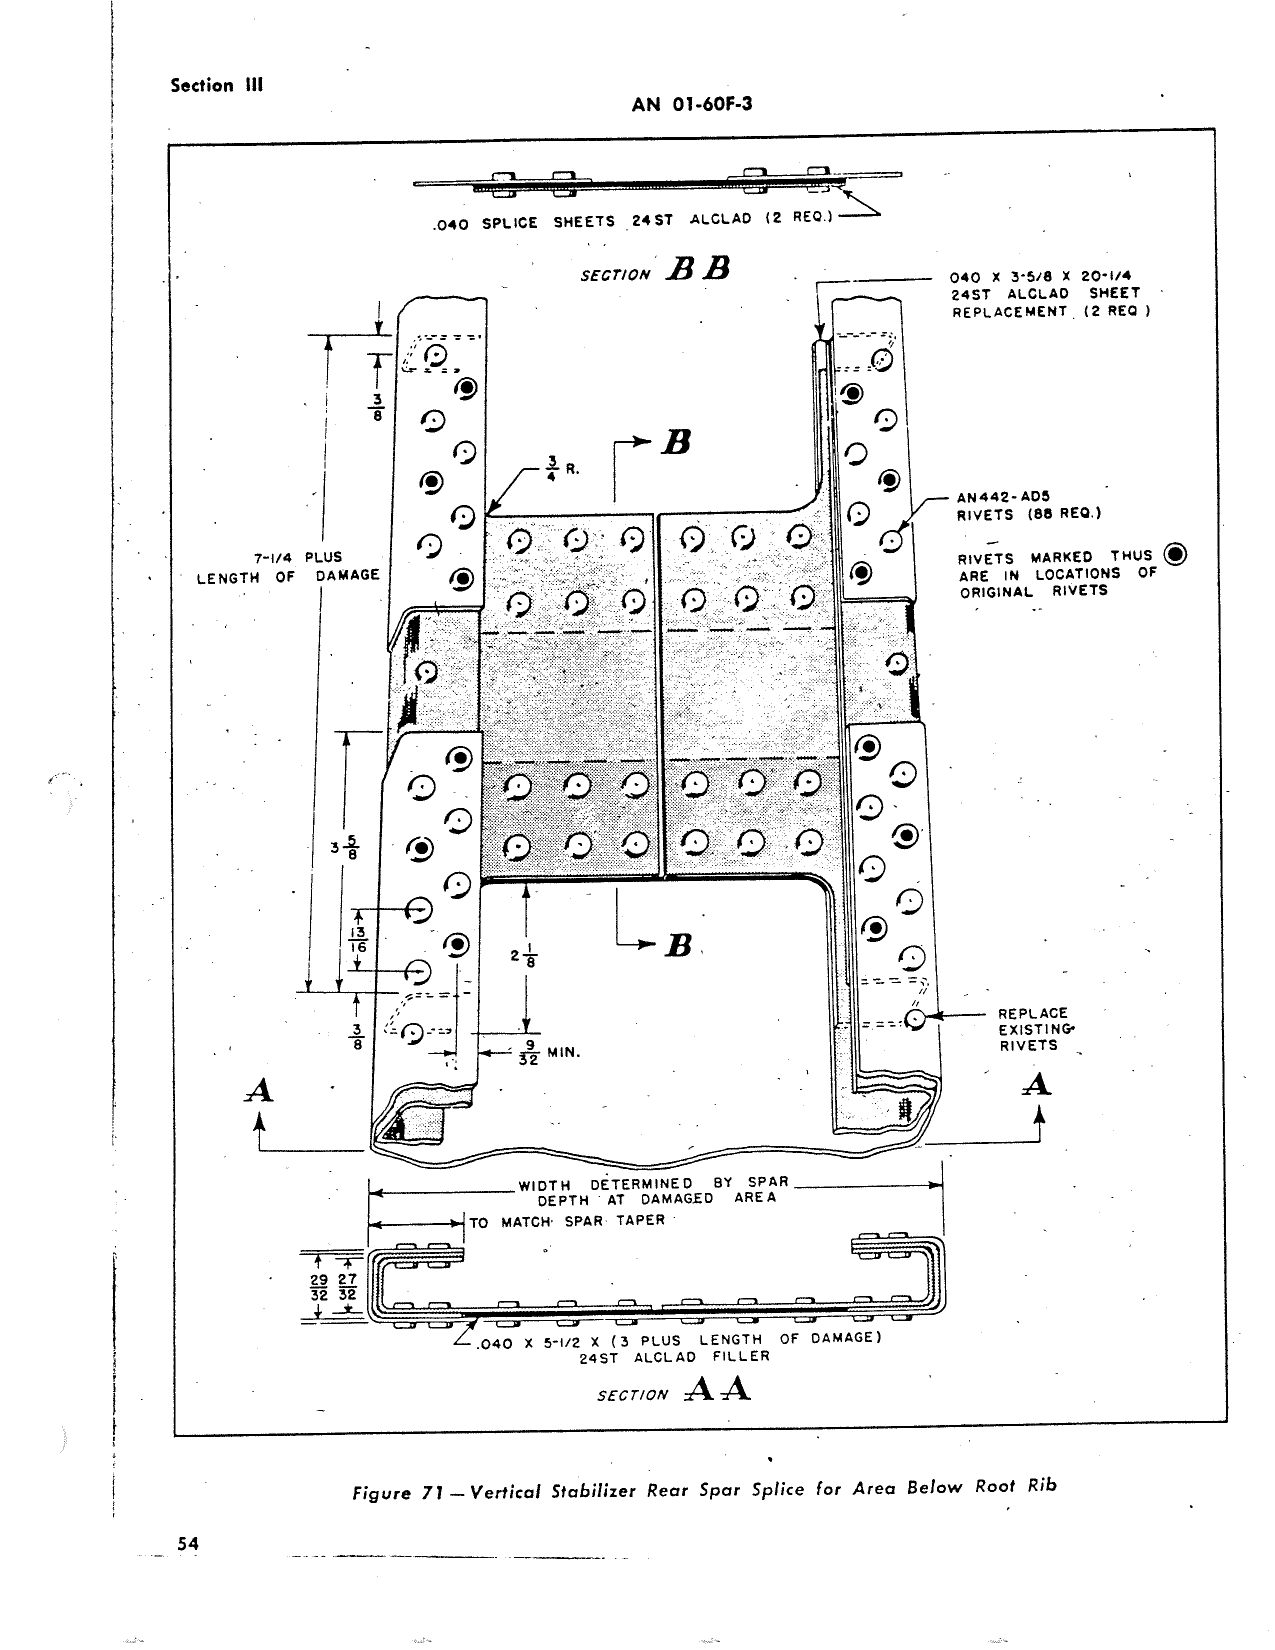 Sample page 62 from AirCorps Library document: Structural Repair Instructions - T-6, SNJ-3, SNJ-4, SNJ-5